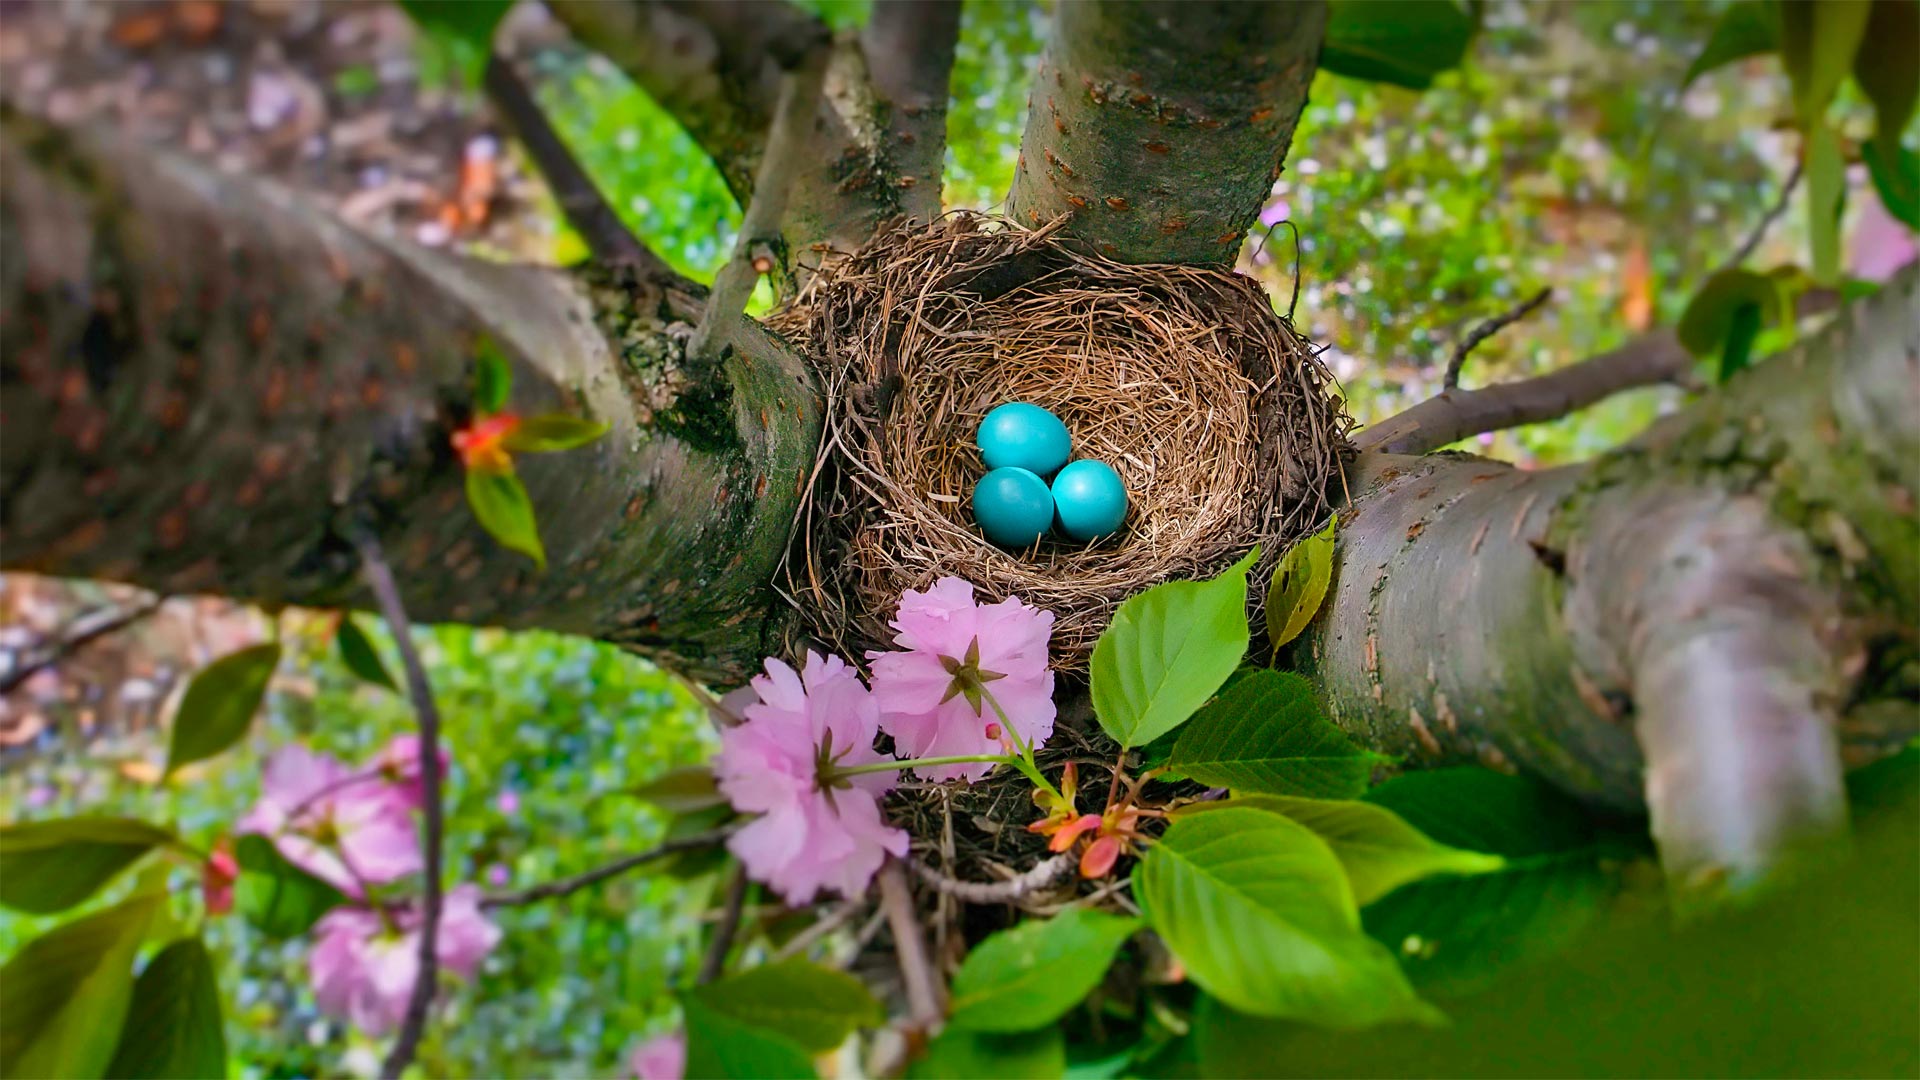 The blue eggs of an American robin in New Jersey - Mira/Alamy)